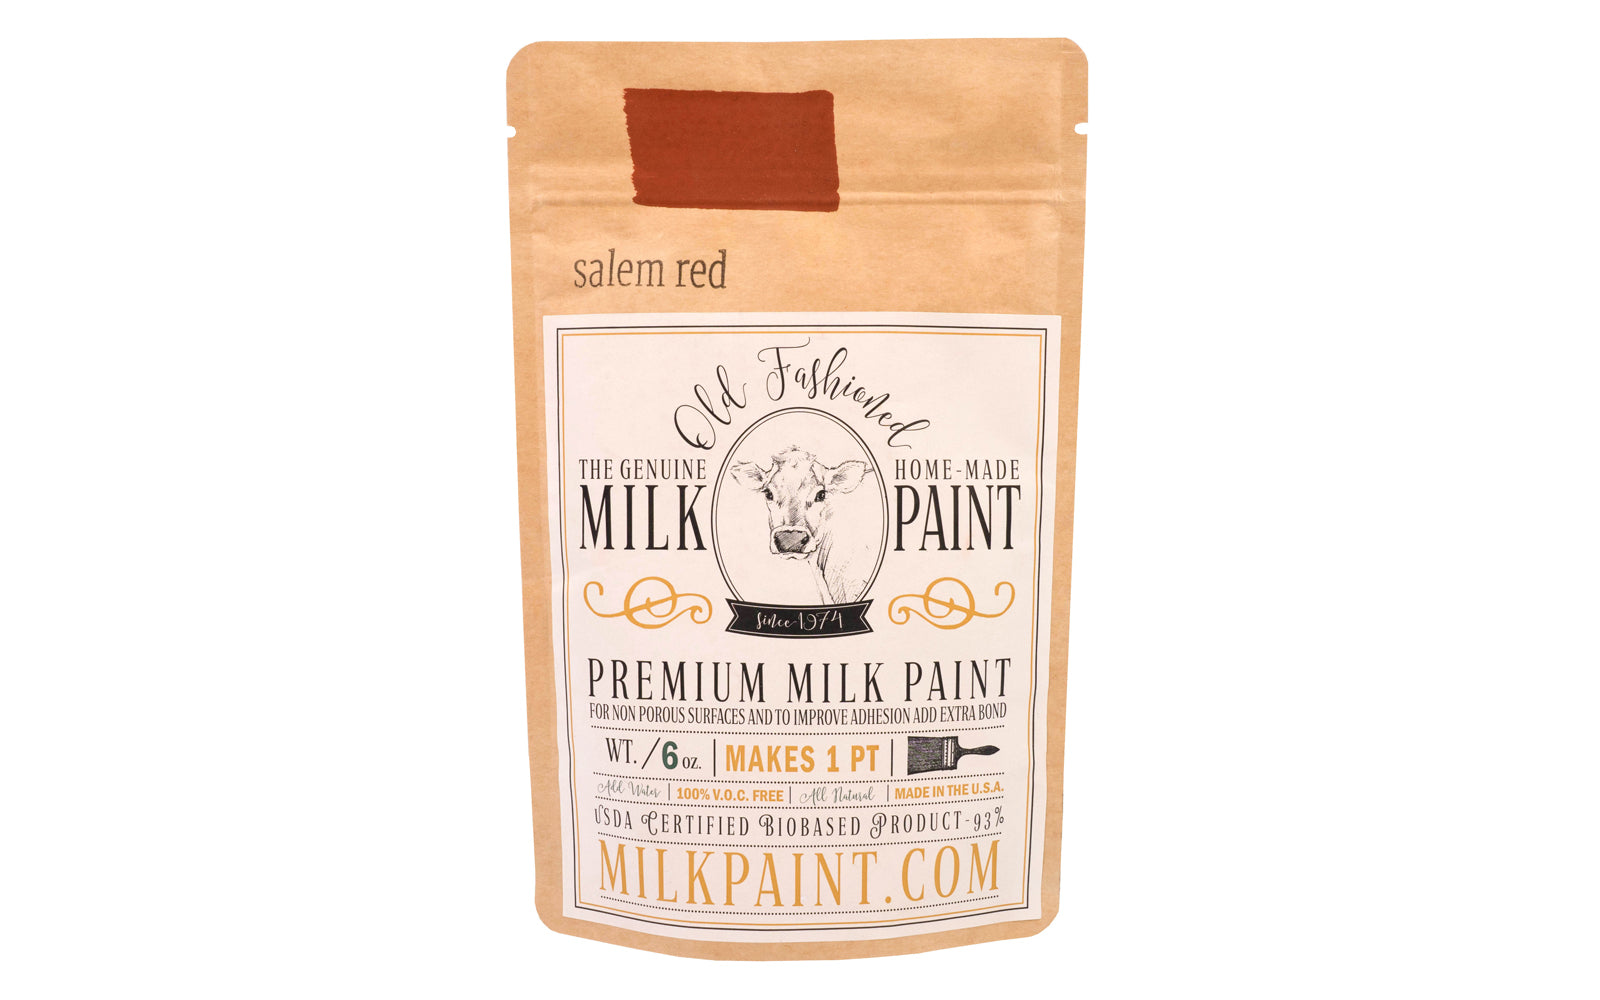 This Milk Paint color is "Salem Red" - It is a dark red with brown and orange undertones. Comes in a powder form, you can control how thick/thin you mix the paint. Use it as you would regular paint, thinner for a wash/stain or thicker to create texture. Environmentally safe, non-toxic & is food safe. 100% VOC free. Powder Paint